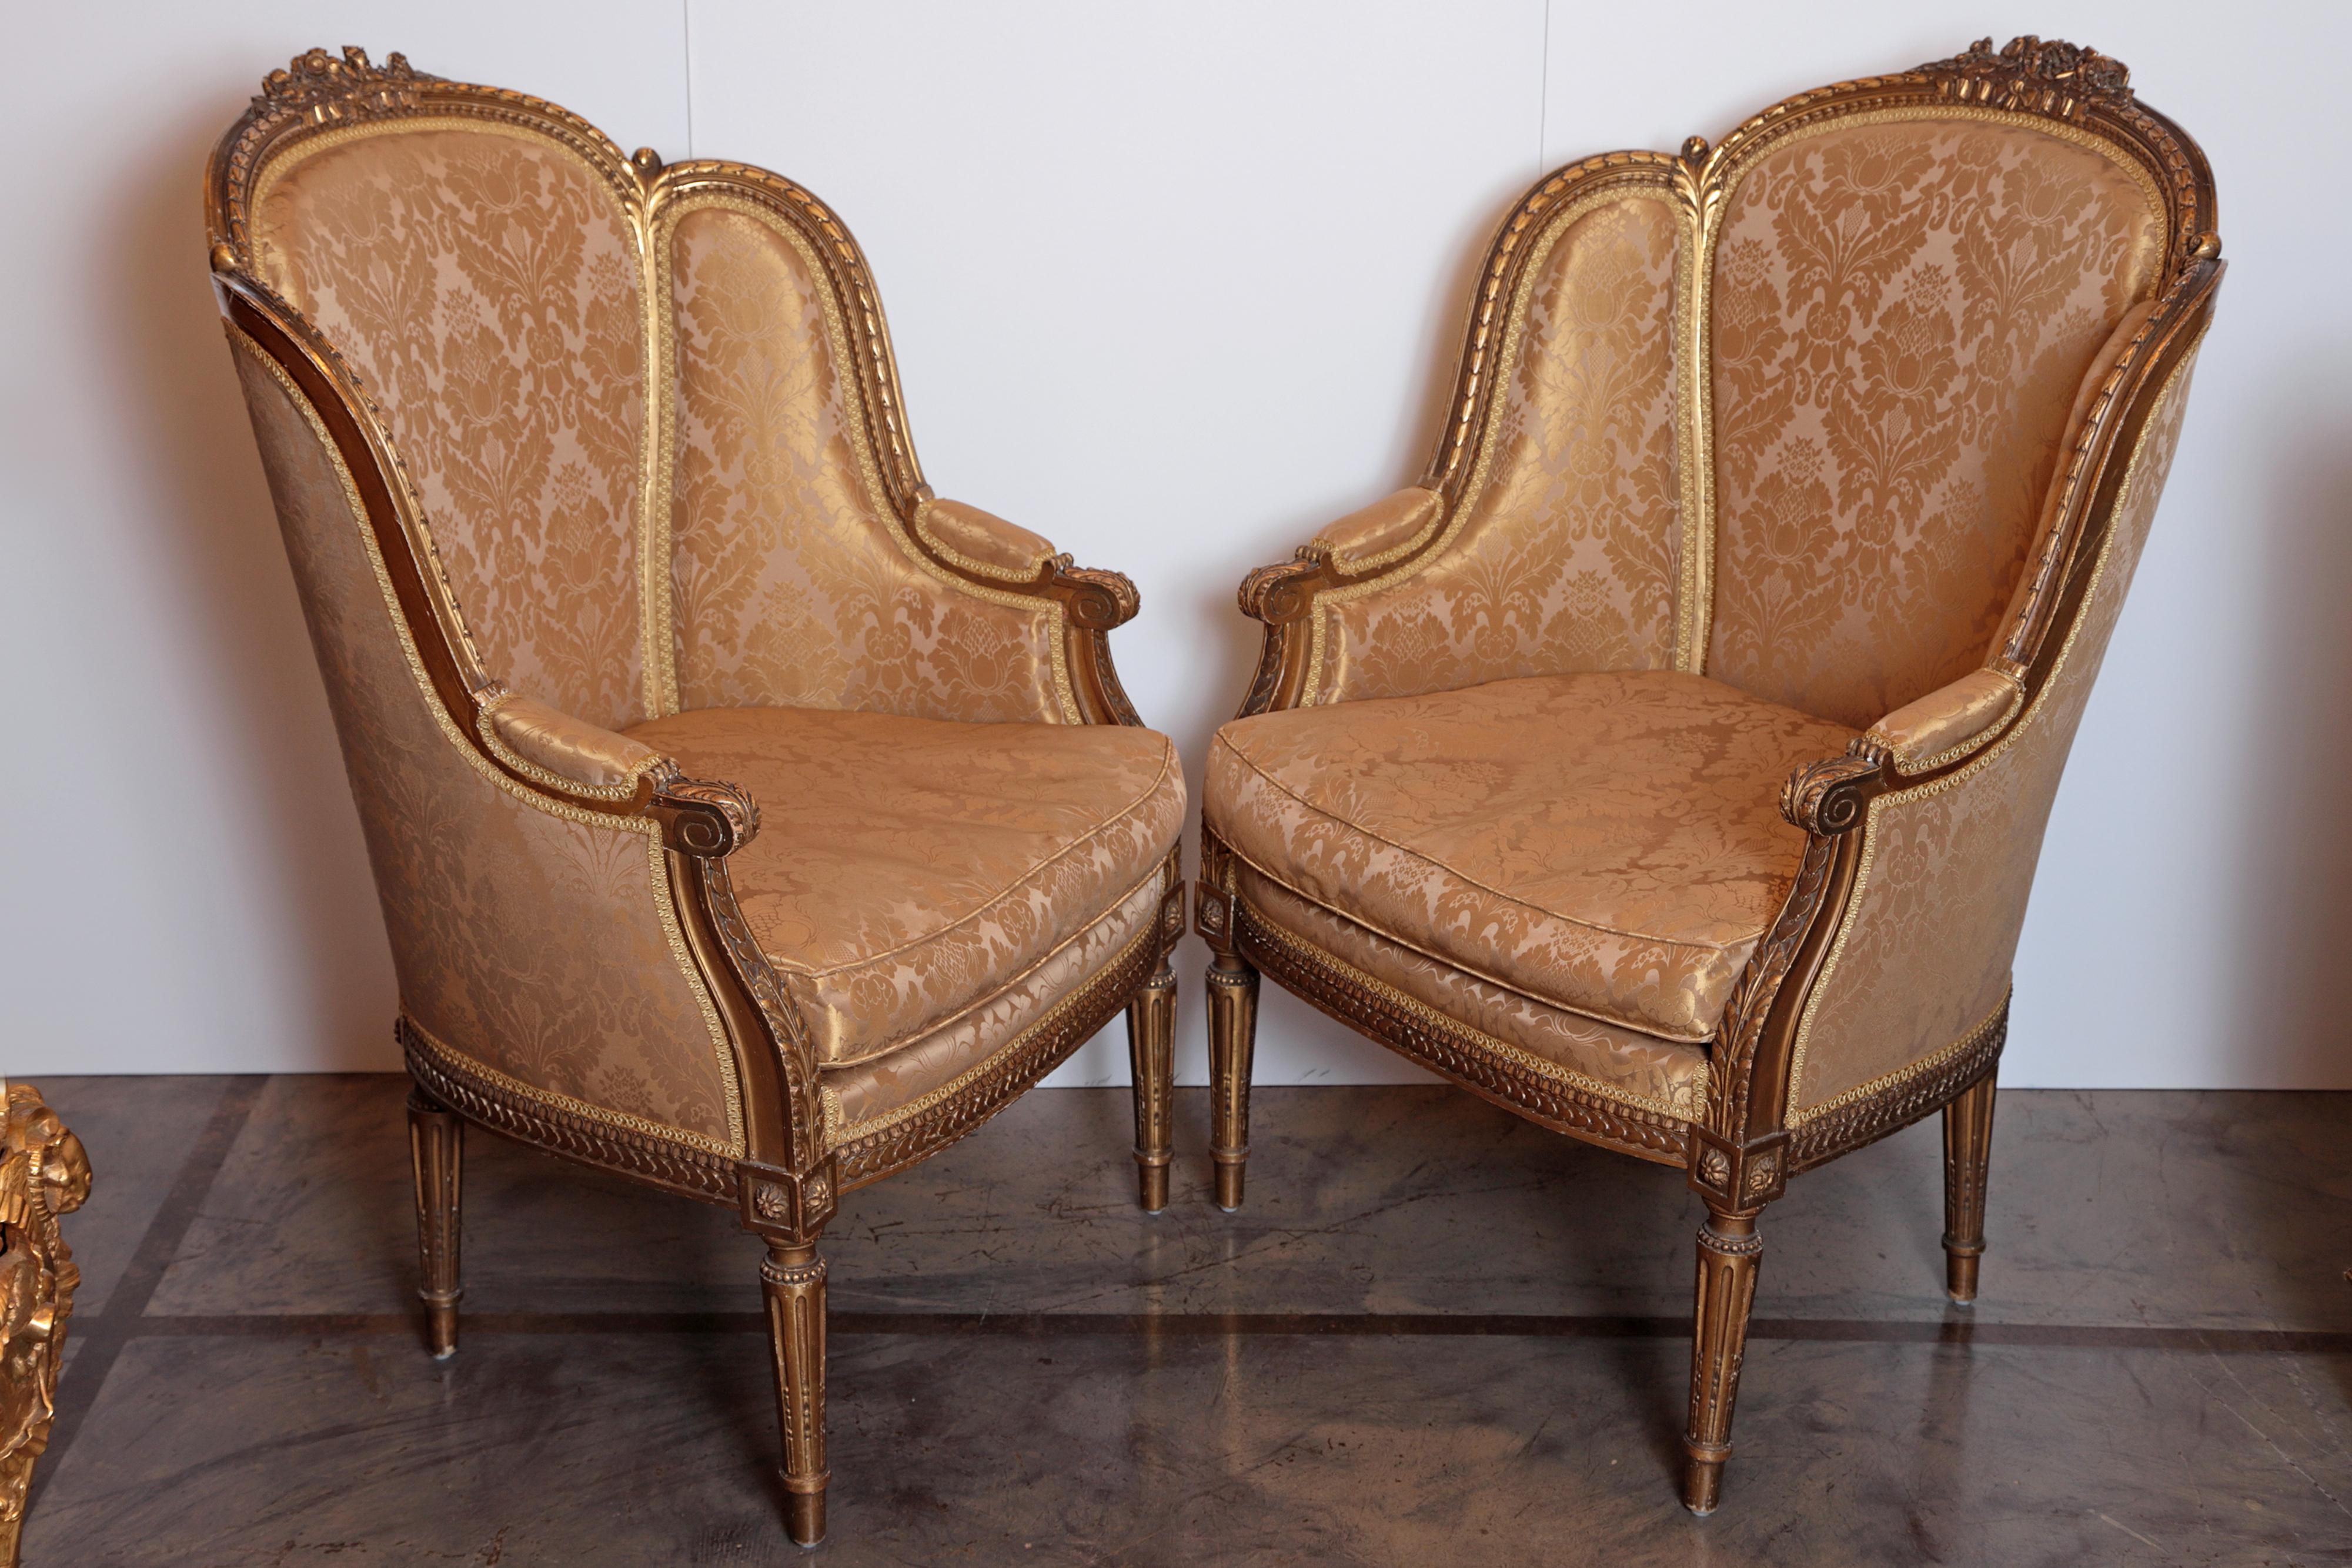 Pair of 19th century French finely carved gilt bergeres.